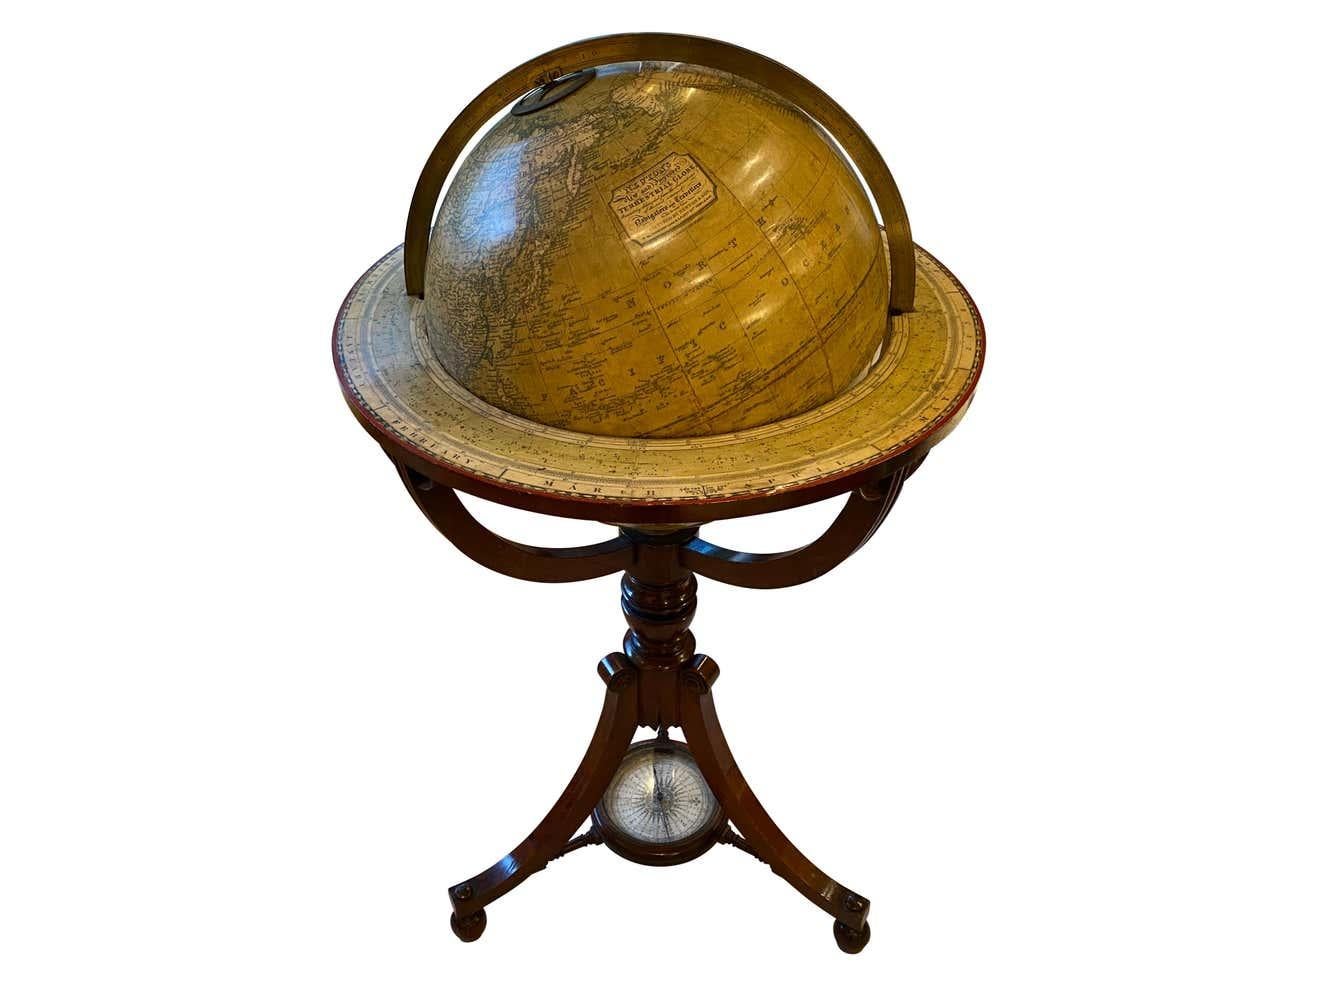 Hardwood 19th Century English Globe by Renowned Cartographers John Newton and Son For Sale